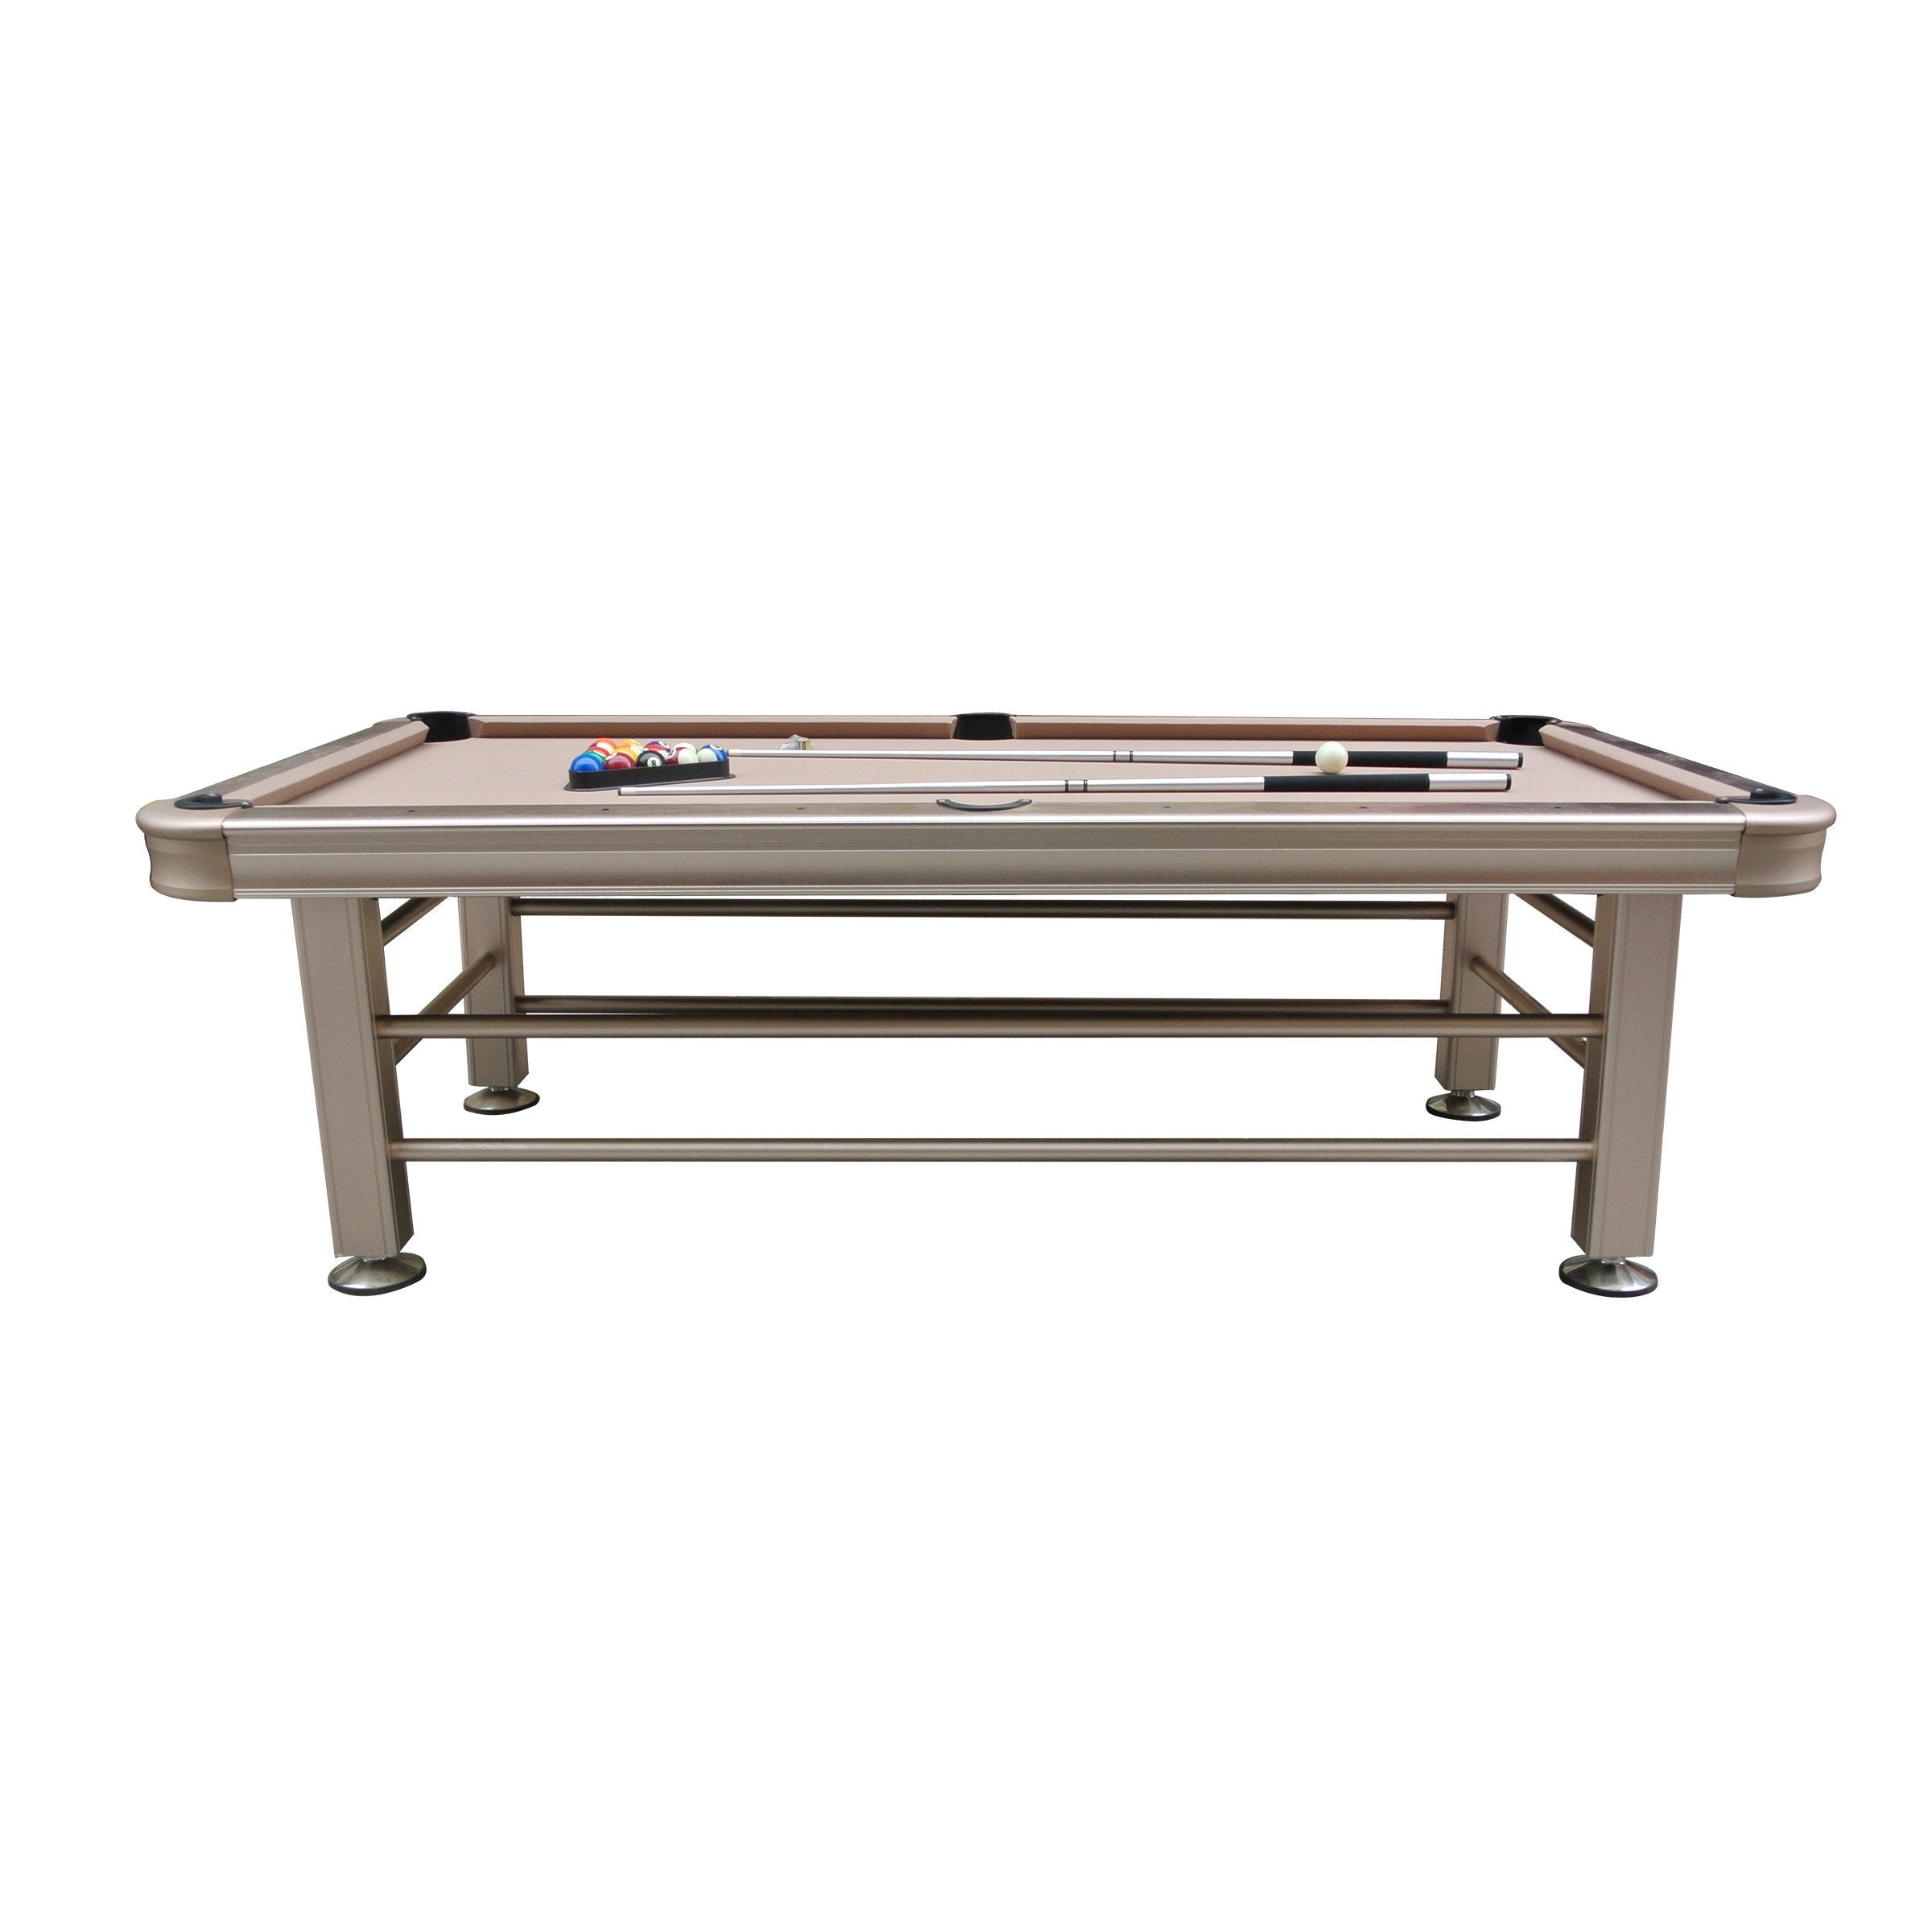 Imperial Non-slate Champagne Outdoor Pool Table